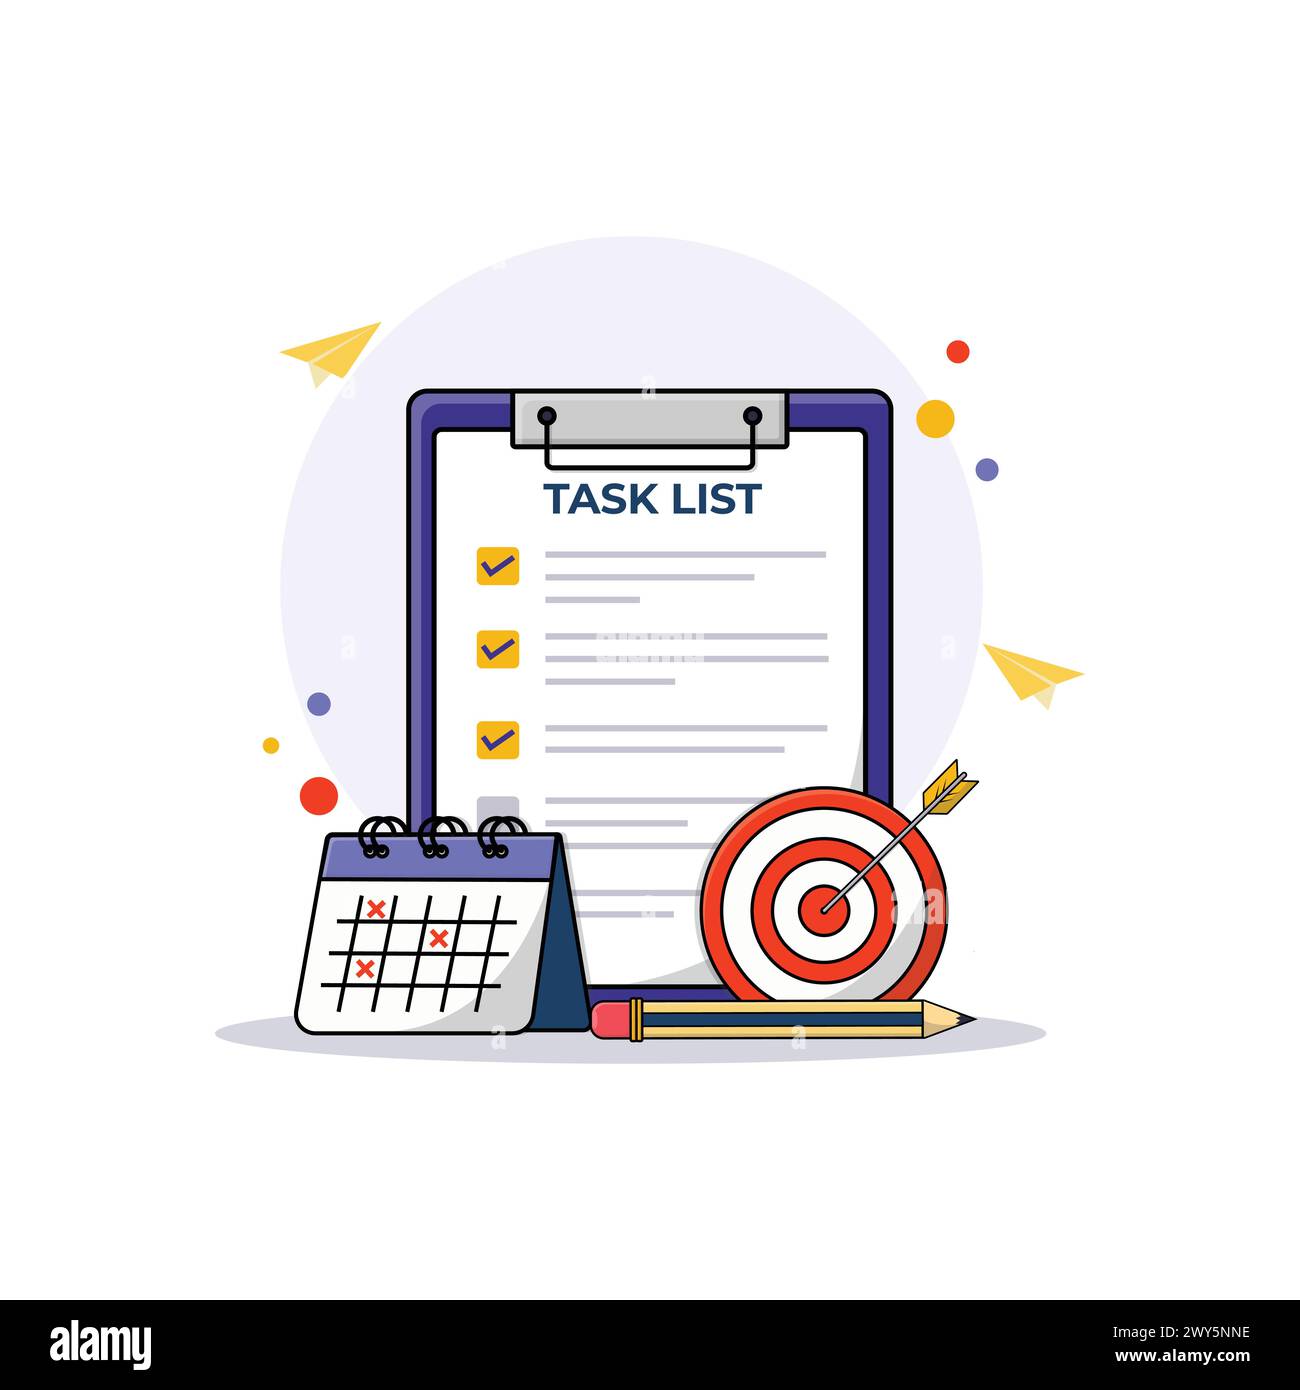 To-Do List with Target and Timeline Vector Illustration. Work Process Concept Design Stock Vector